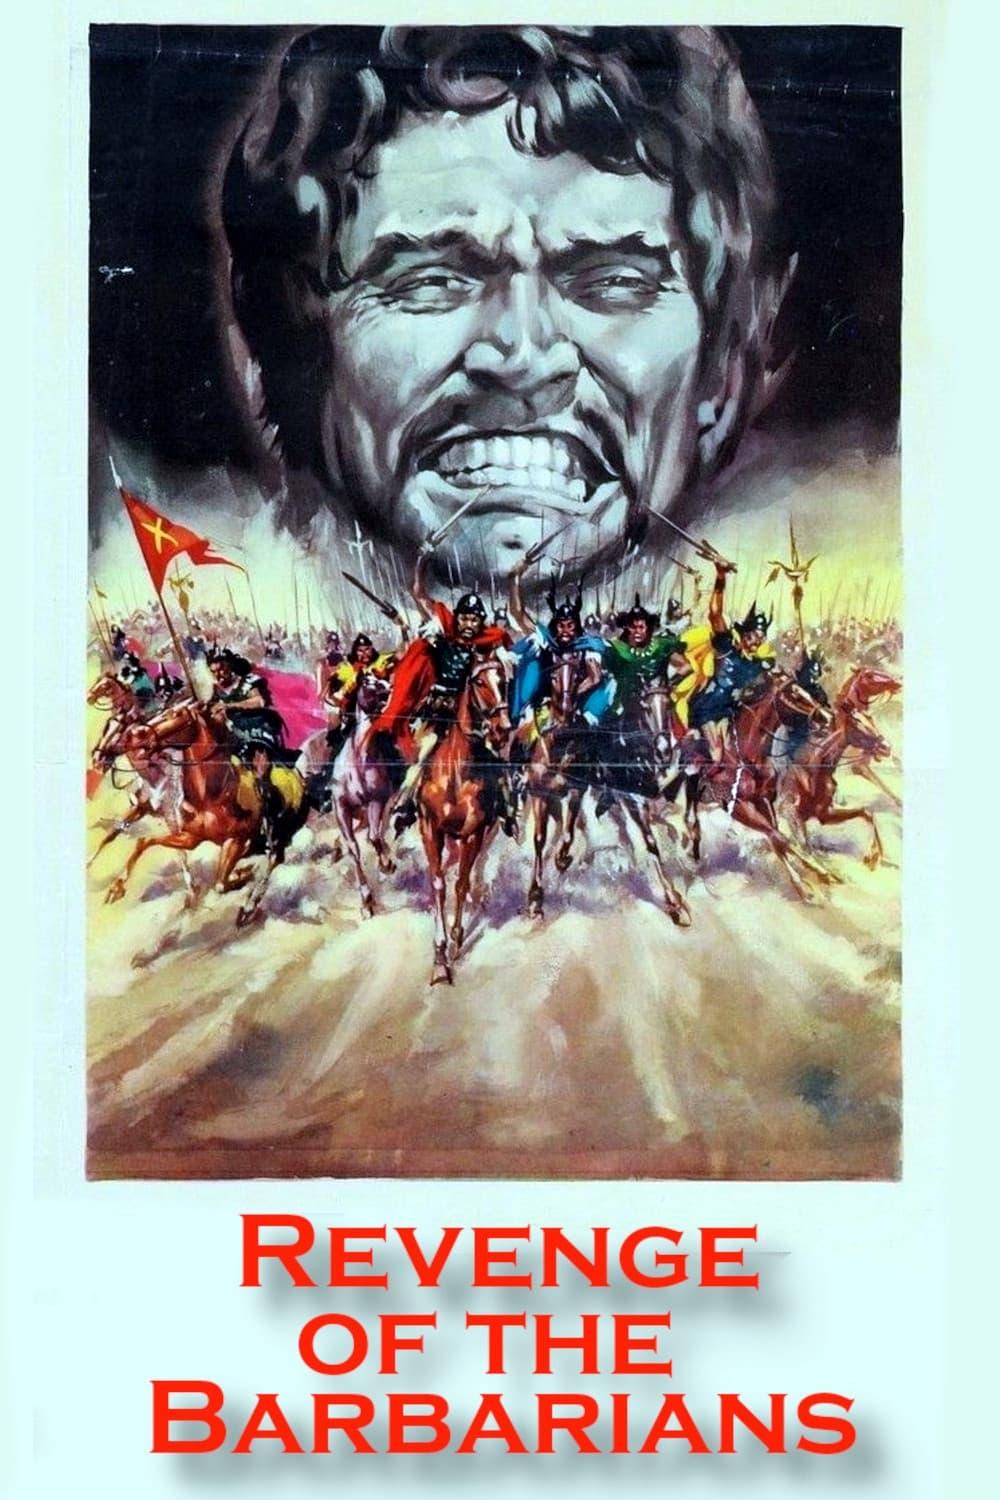 Revenge of the Barbarians poster